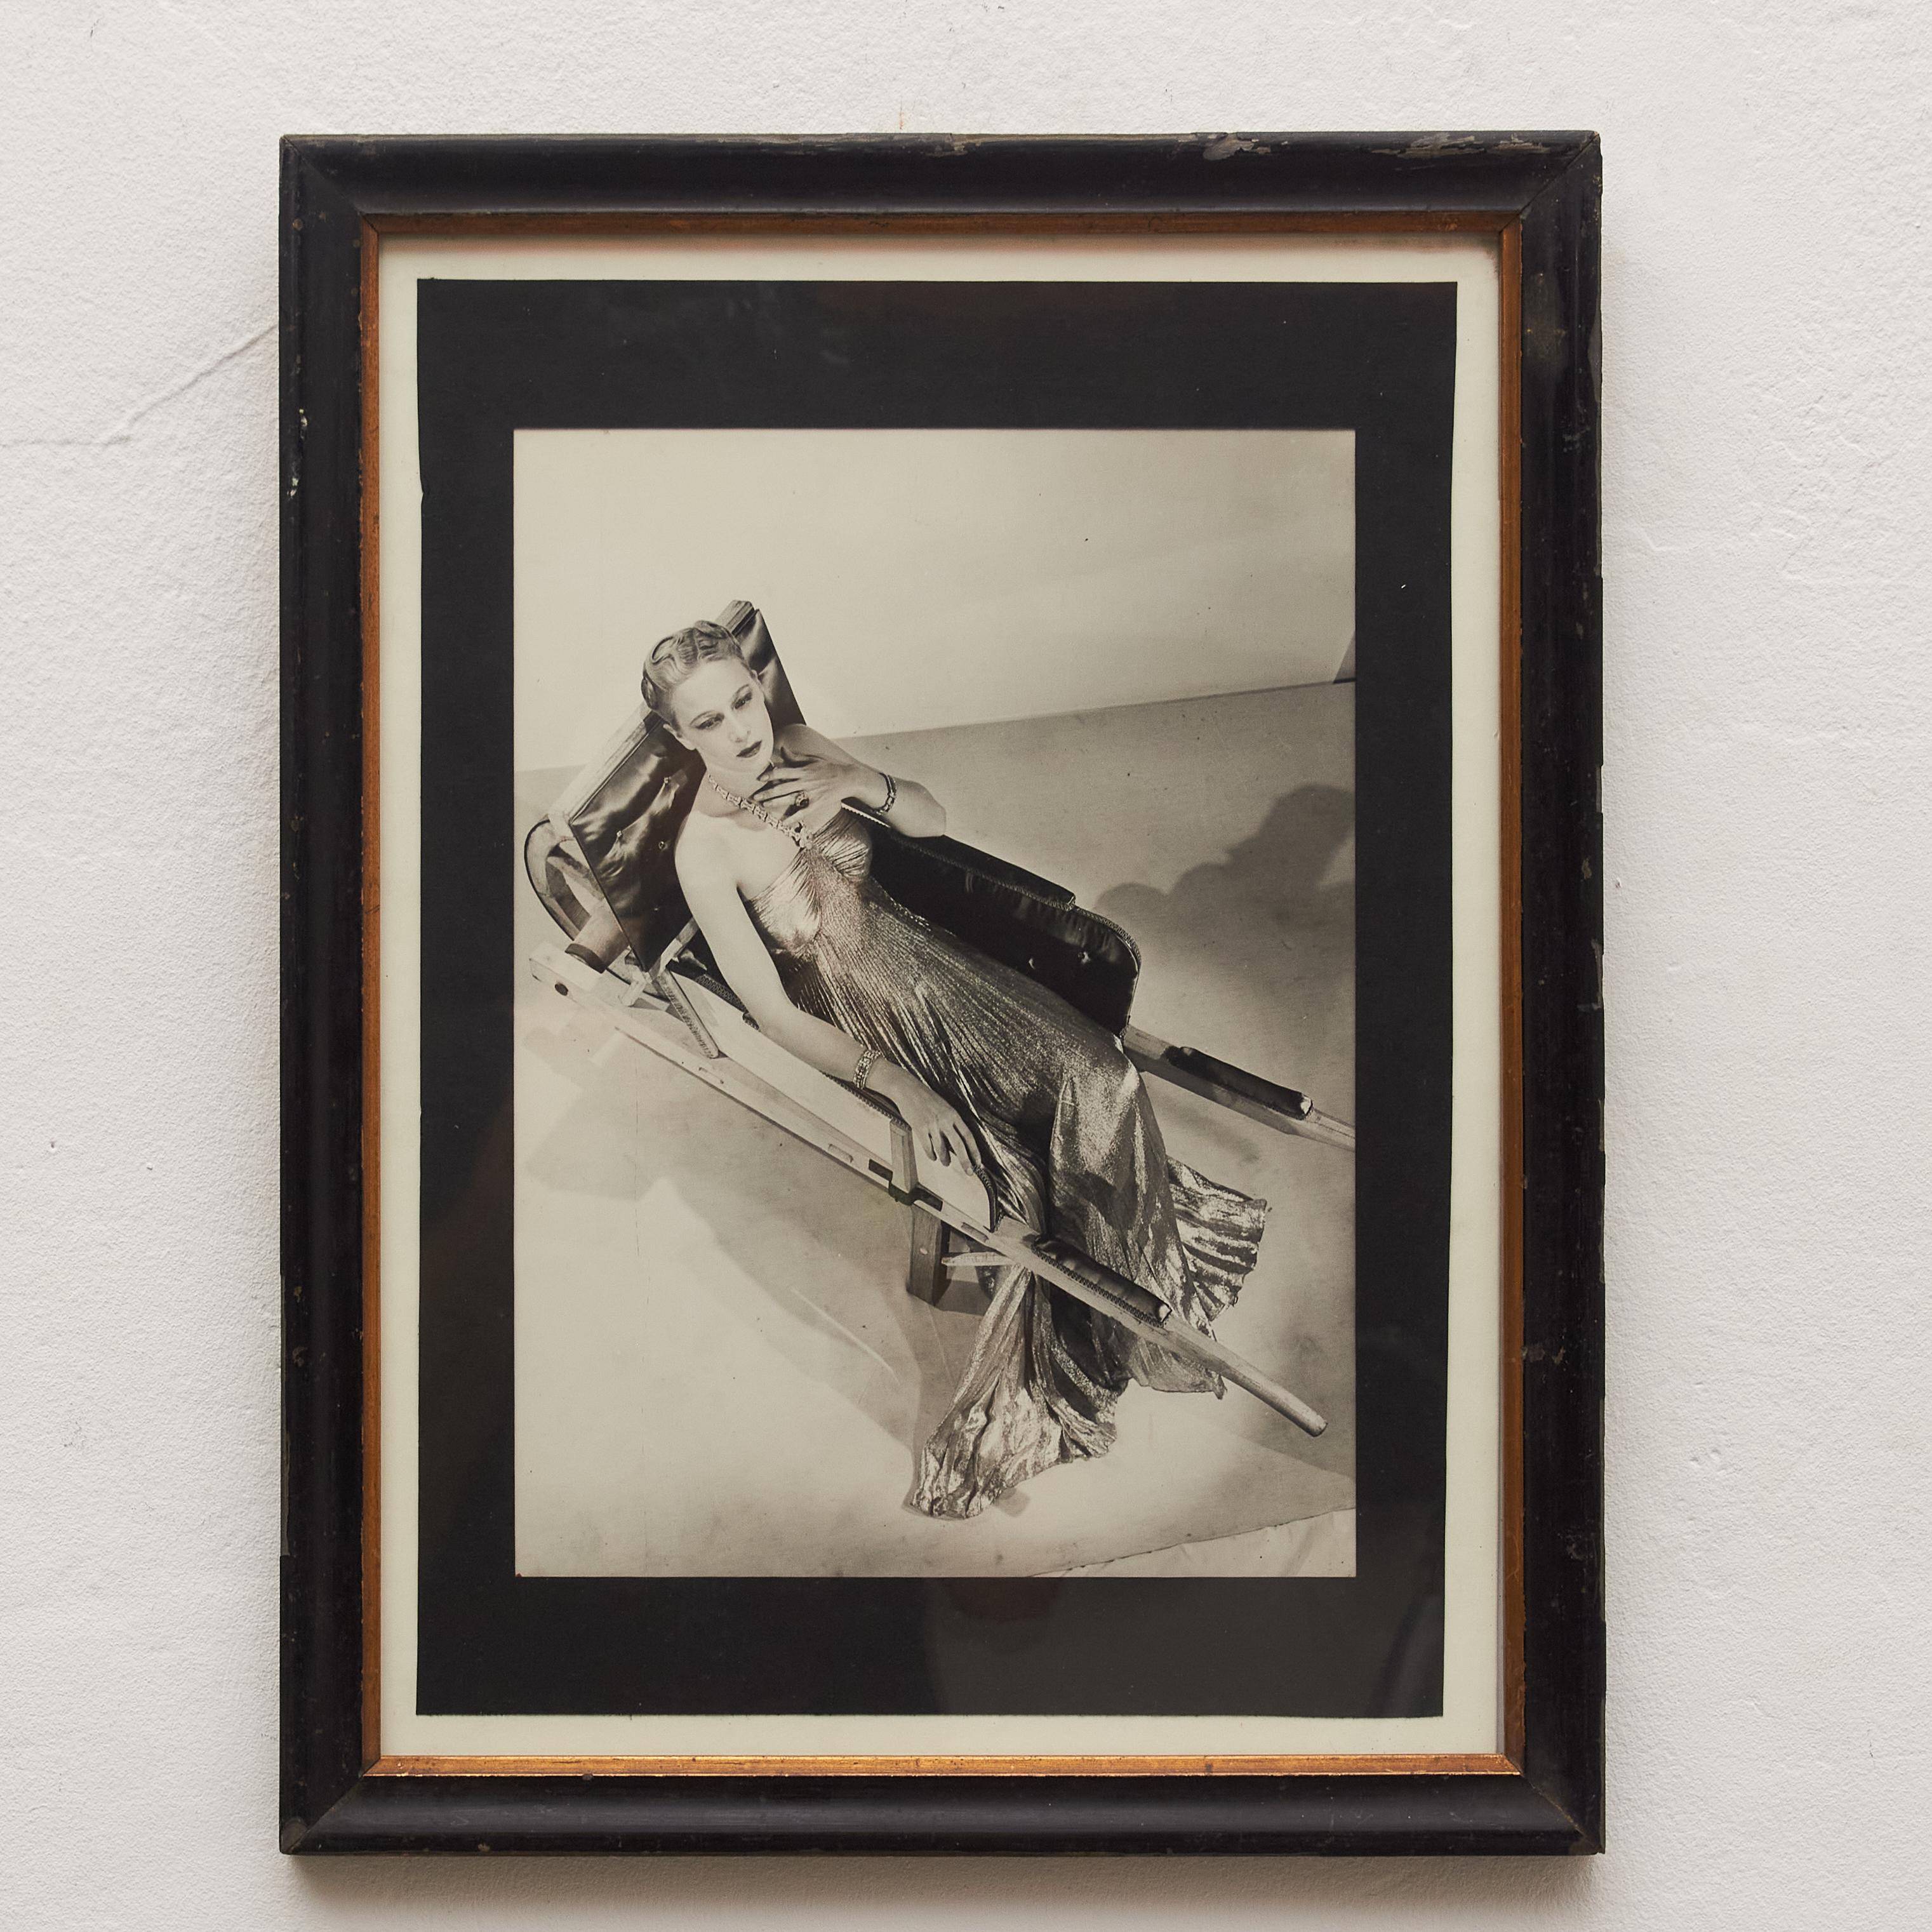 Step into the enigmatic world of Man Ray, a trailblazer in the realms of Dada and Surrealism, through this exceptional black and white photograph. Carefully framed in an early 20th-century frame, this masterpiece encapsulates the visionary approach